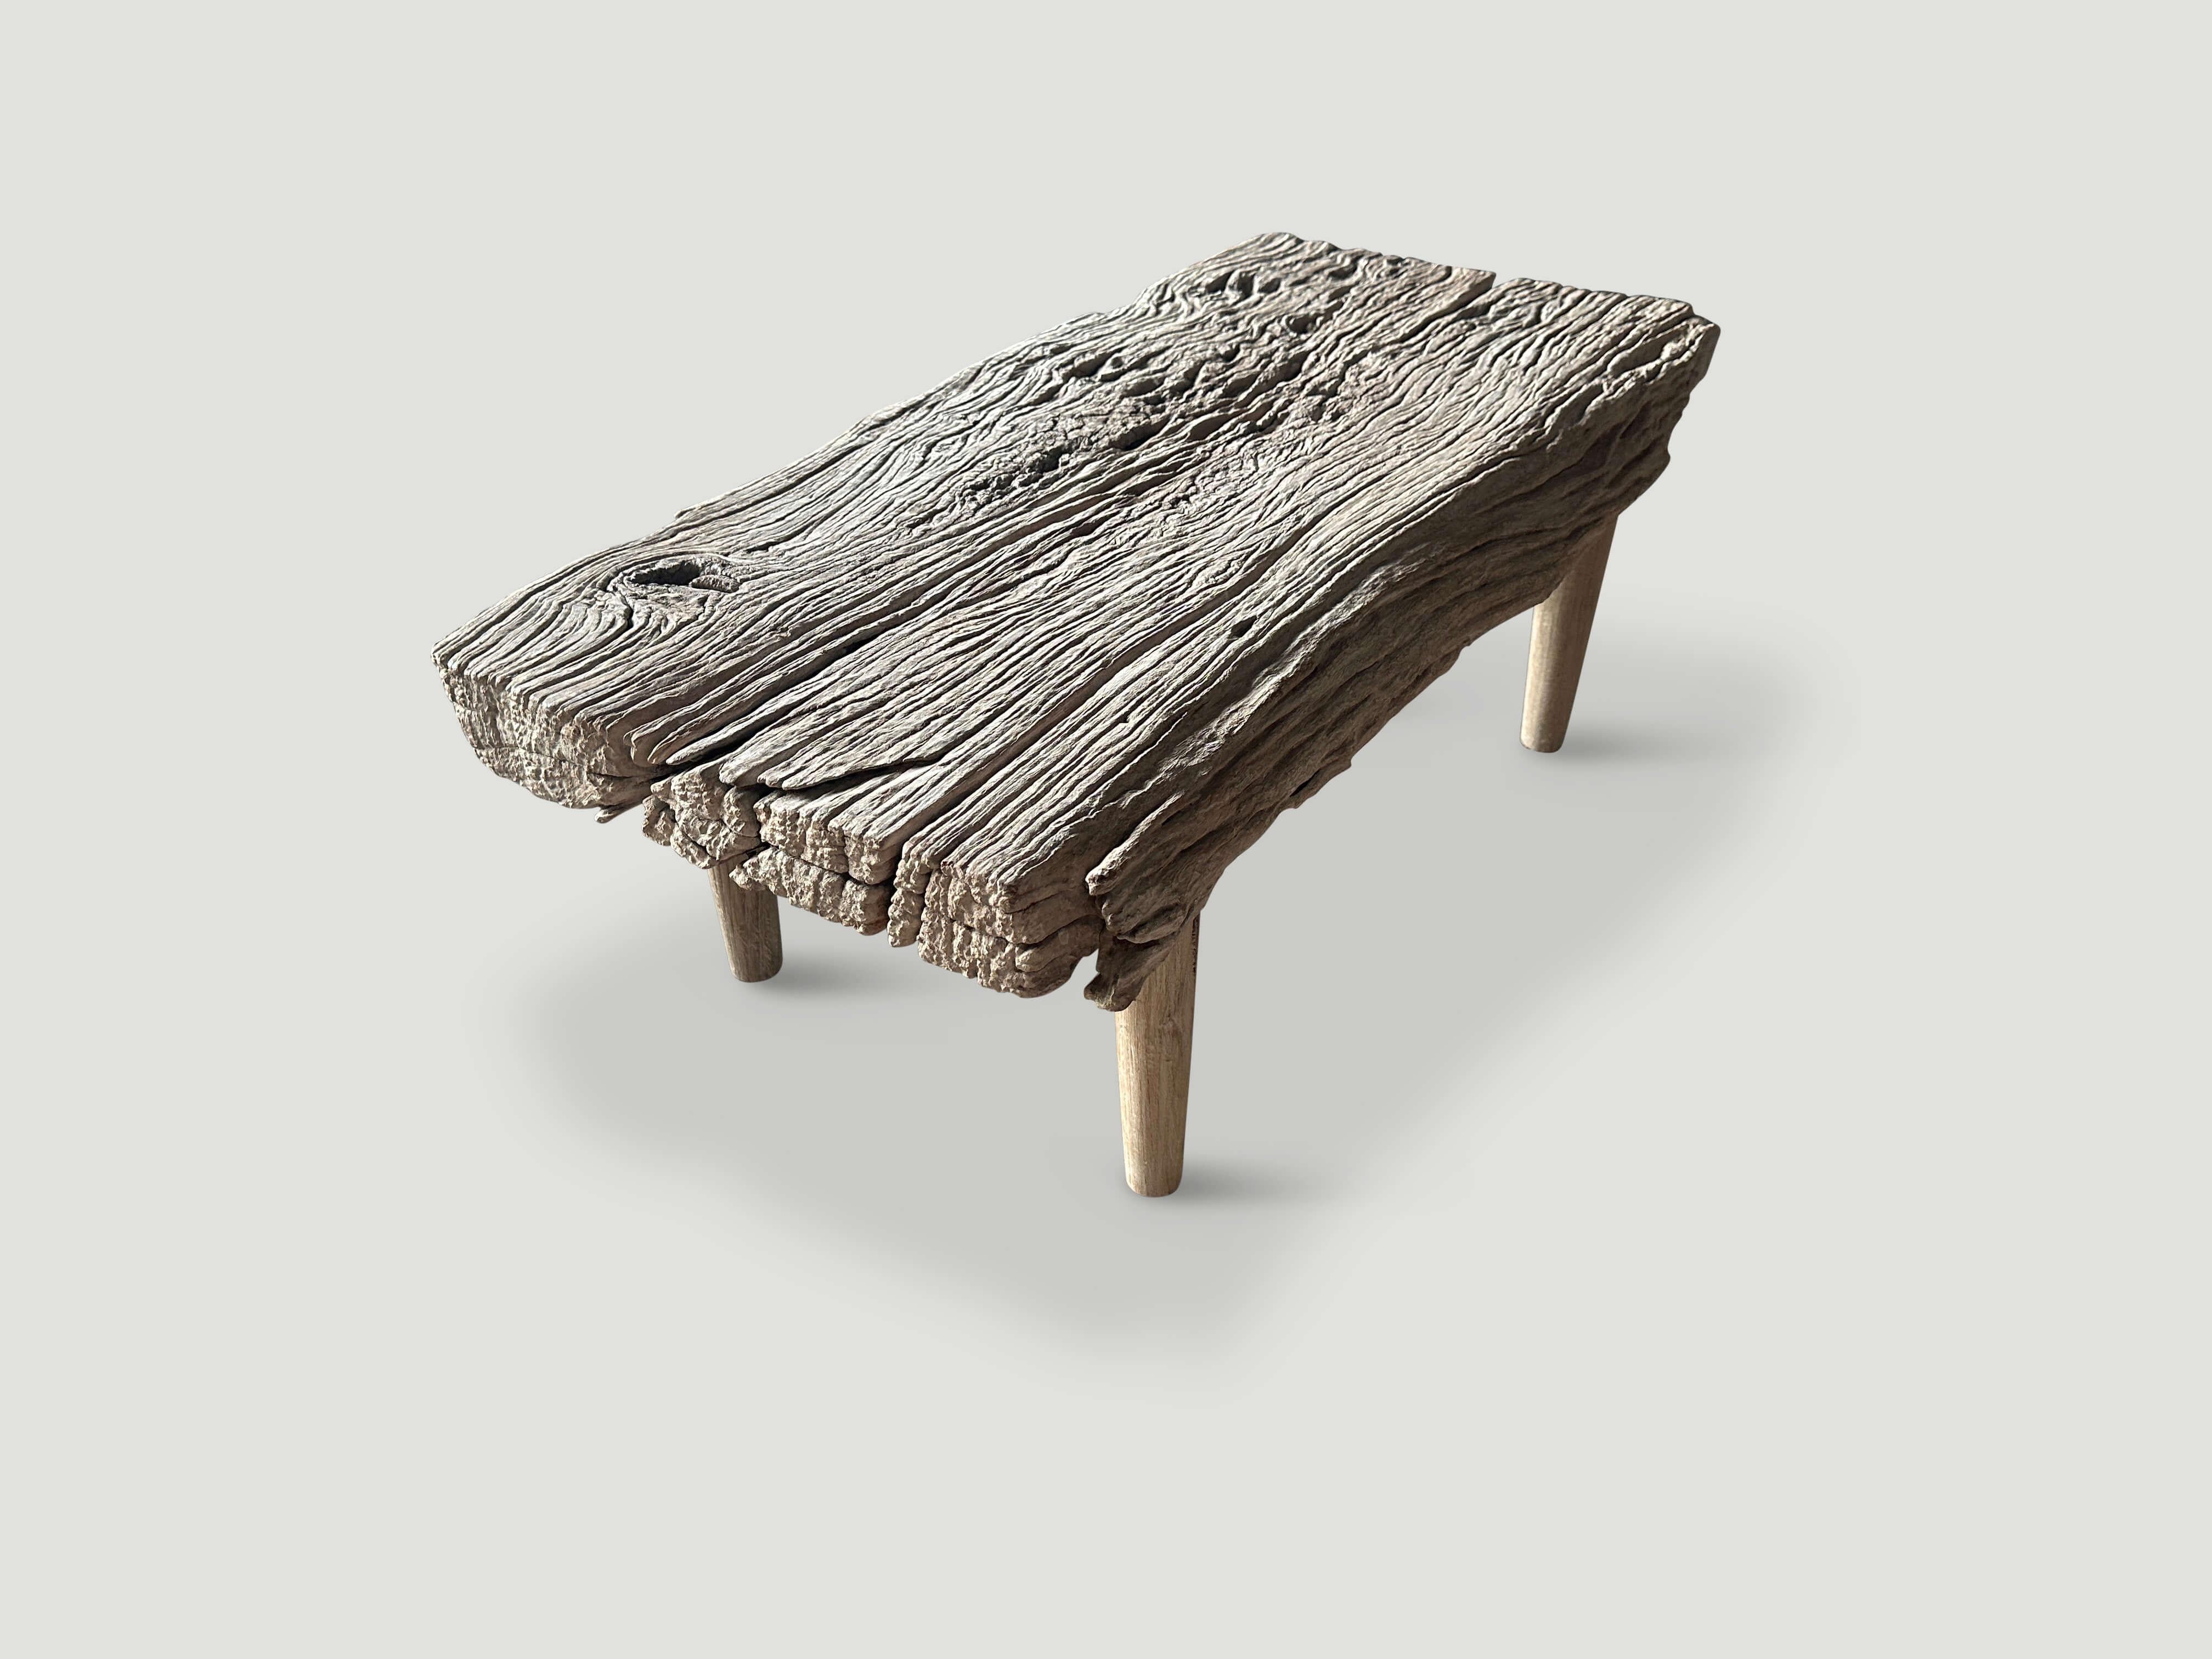 A single three inch thick slab of teak wood hand made into this beautiful coffee table or bench with unique natural character. We added smooth teak minimalist legs to this unique ancient wood. It’s all in the details.

The St. Barts Collection